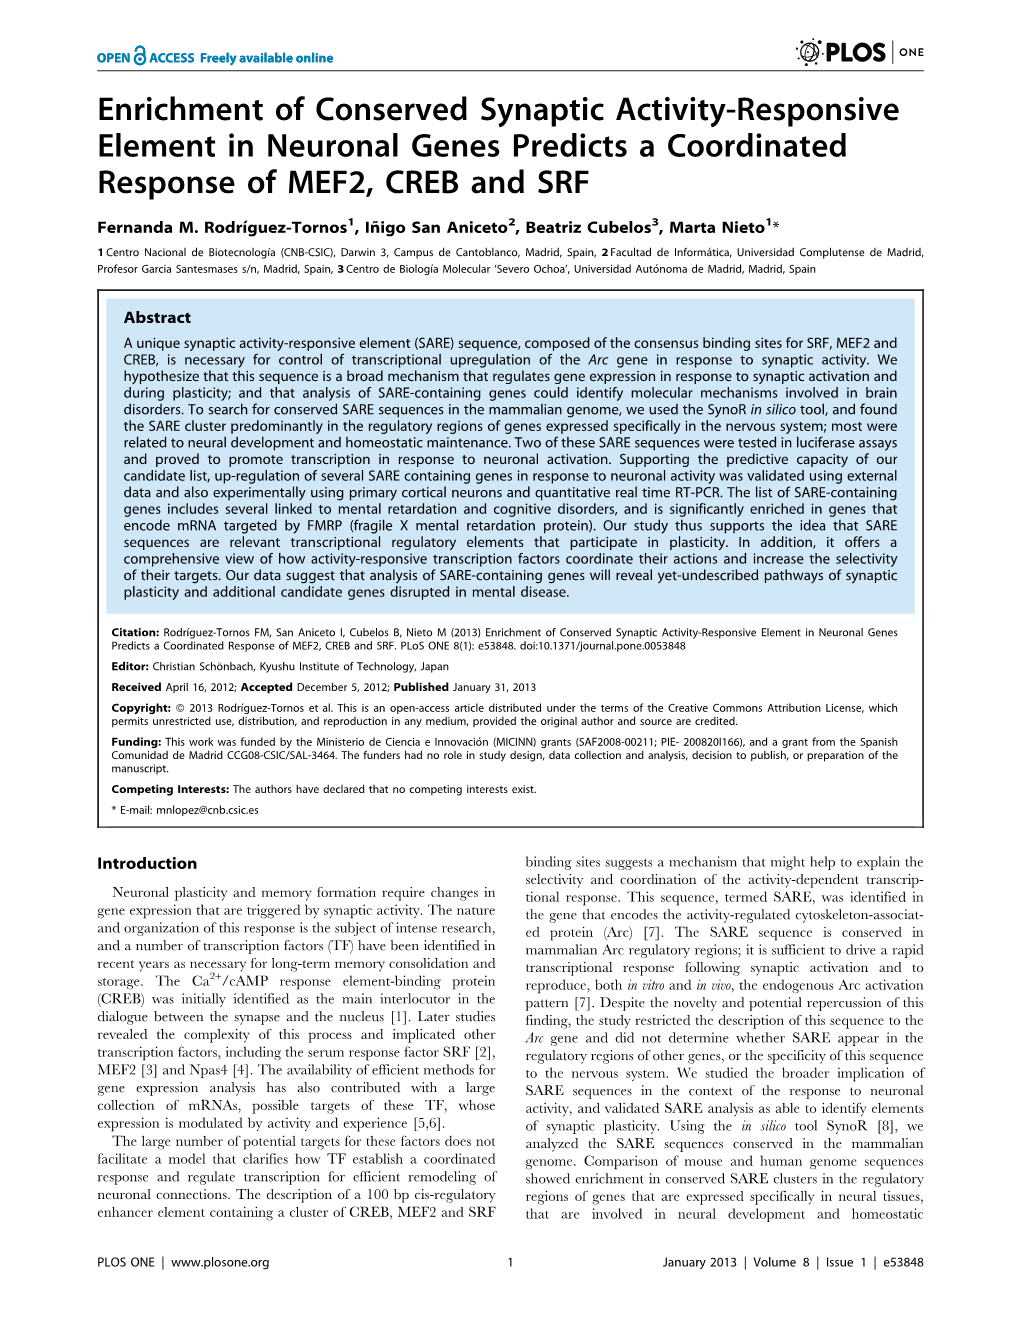 Enrichment of Conserved Synaptic Activity-Responsive Element in Neuronal Genes Predicts a Coordinated Response of MEF2, CREB and SRF